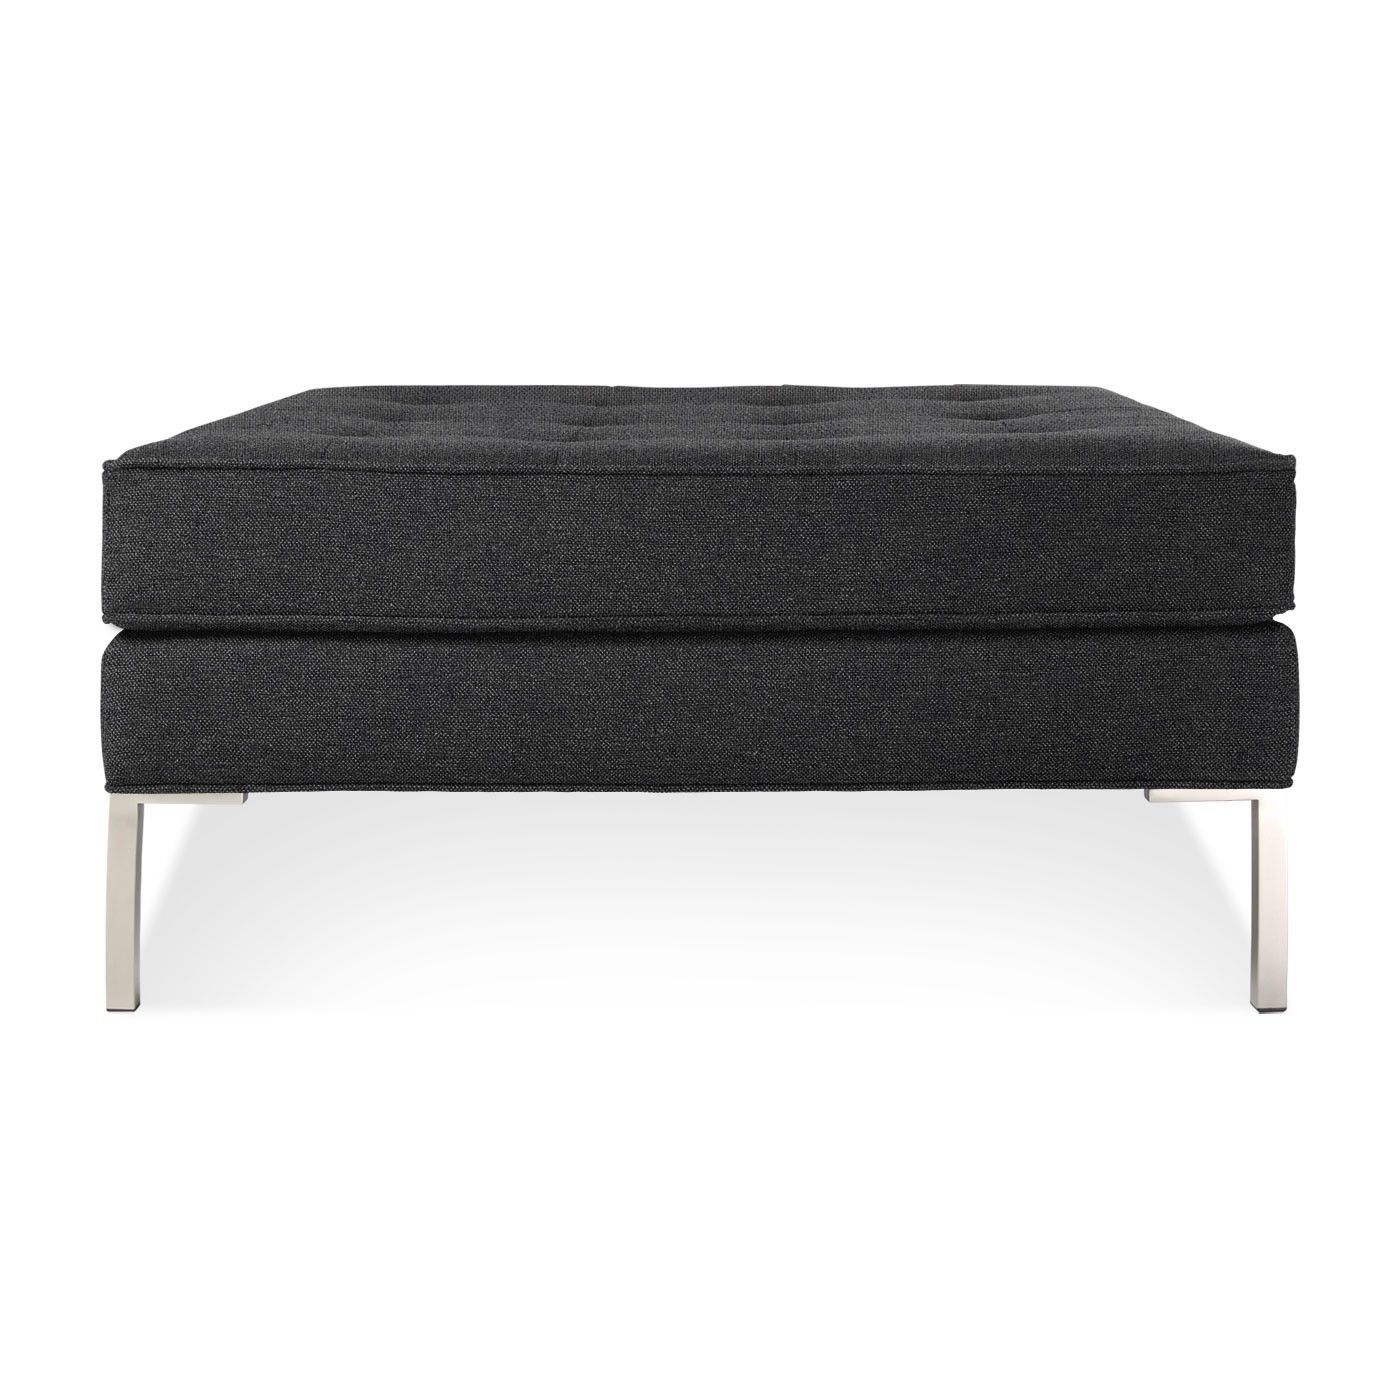 Paramount Large Square Modern Ottoman Lead Front 1 | Large Square For Bronze Steel Tufted Square Ottomans (View 11 of 20)